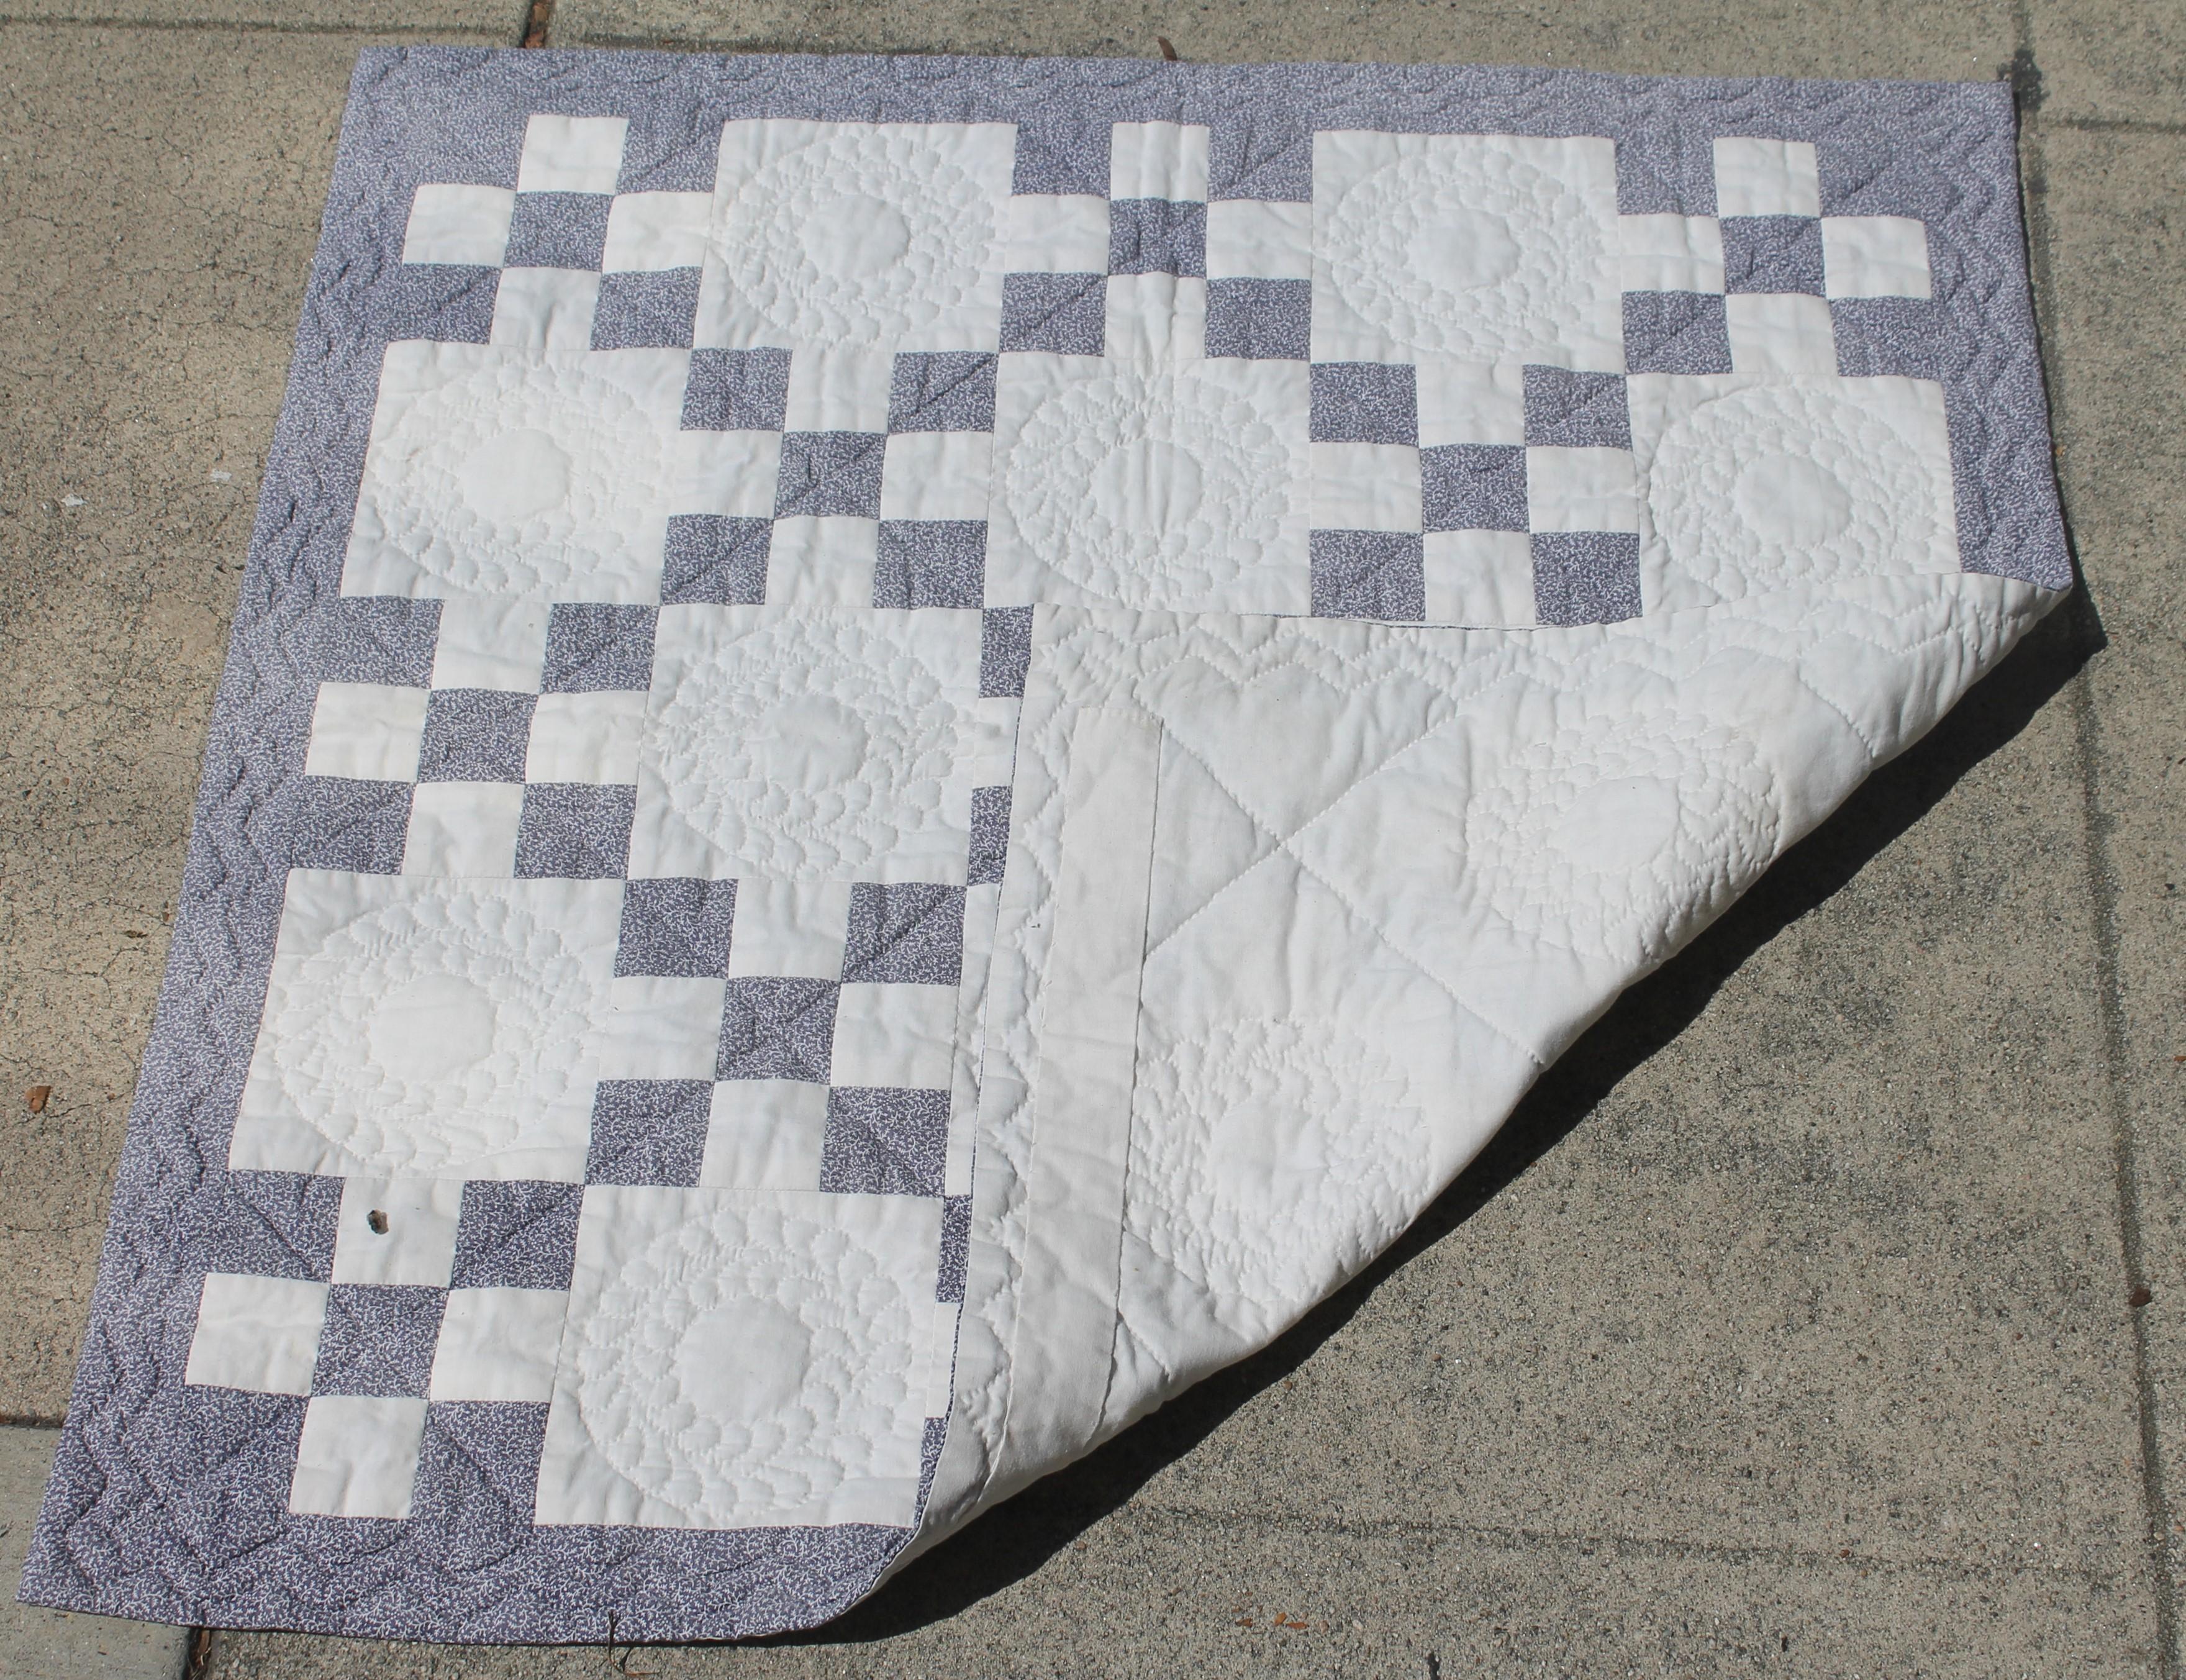 Antique five patch crib quilt in fine condition. The color is mulberry calico print with very fine tight quilting.